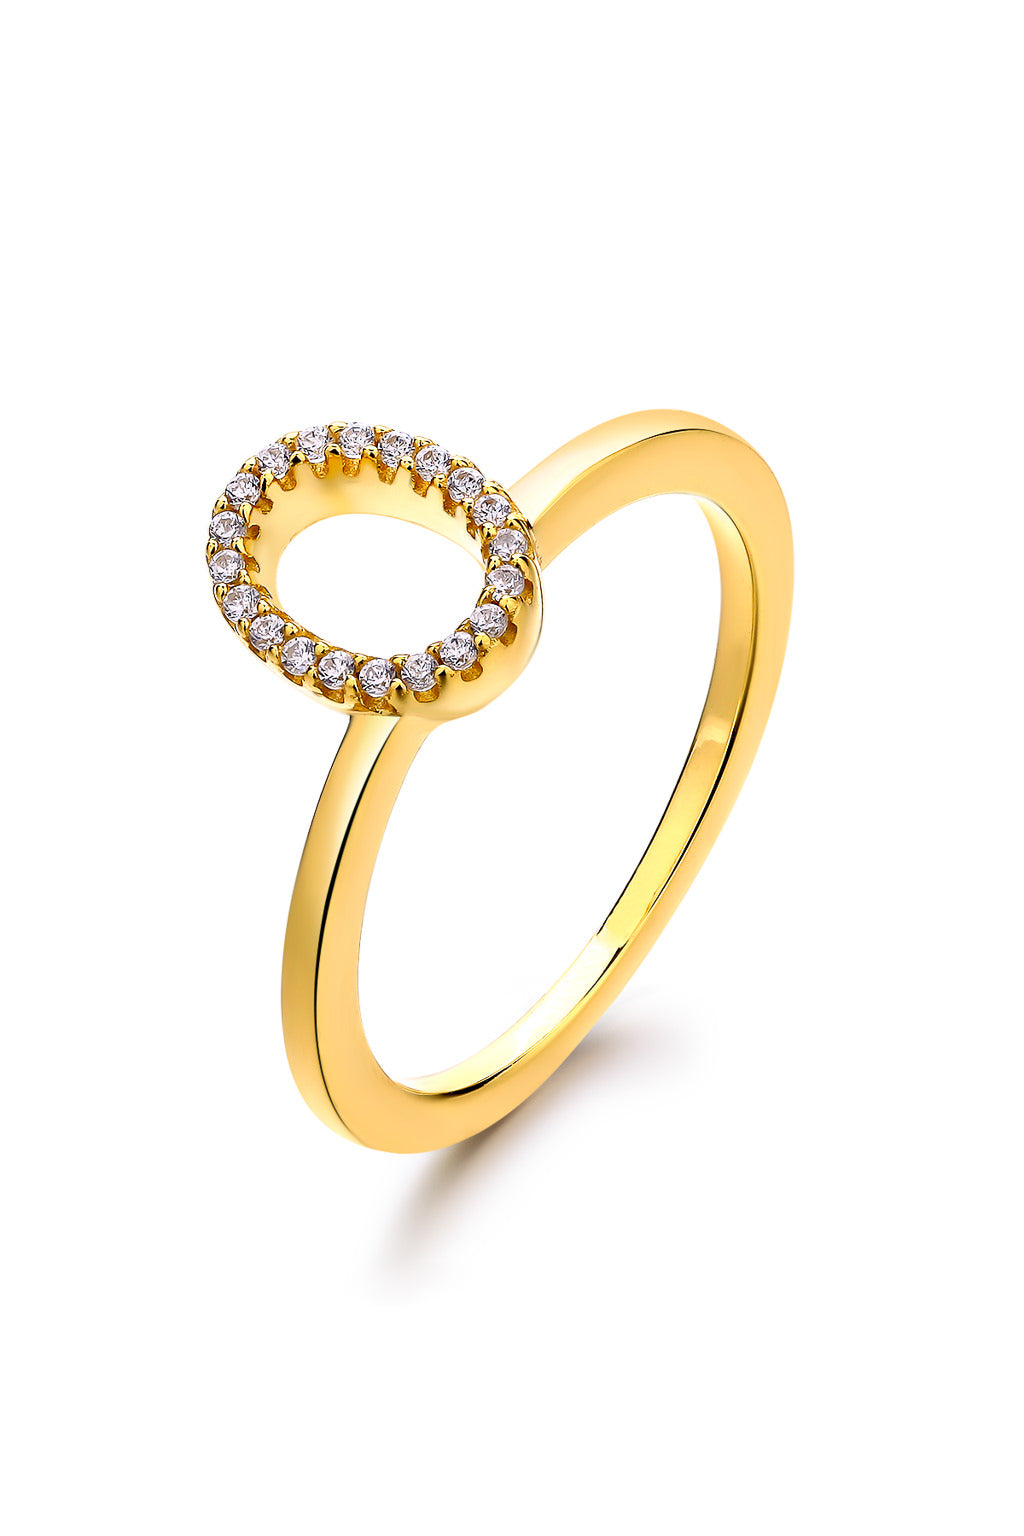 Emoji Surprise Surprise Gold Plated Silver Ring